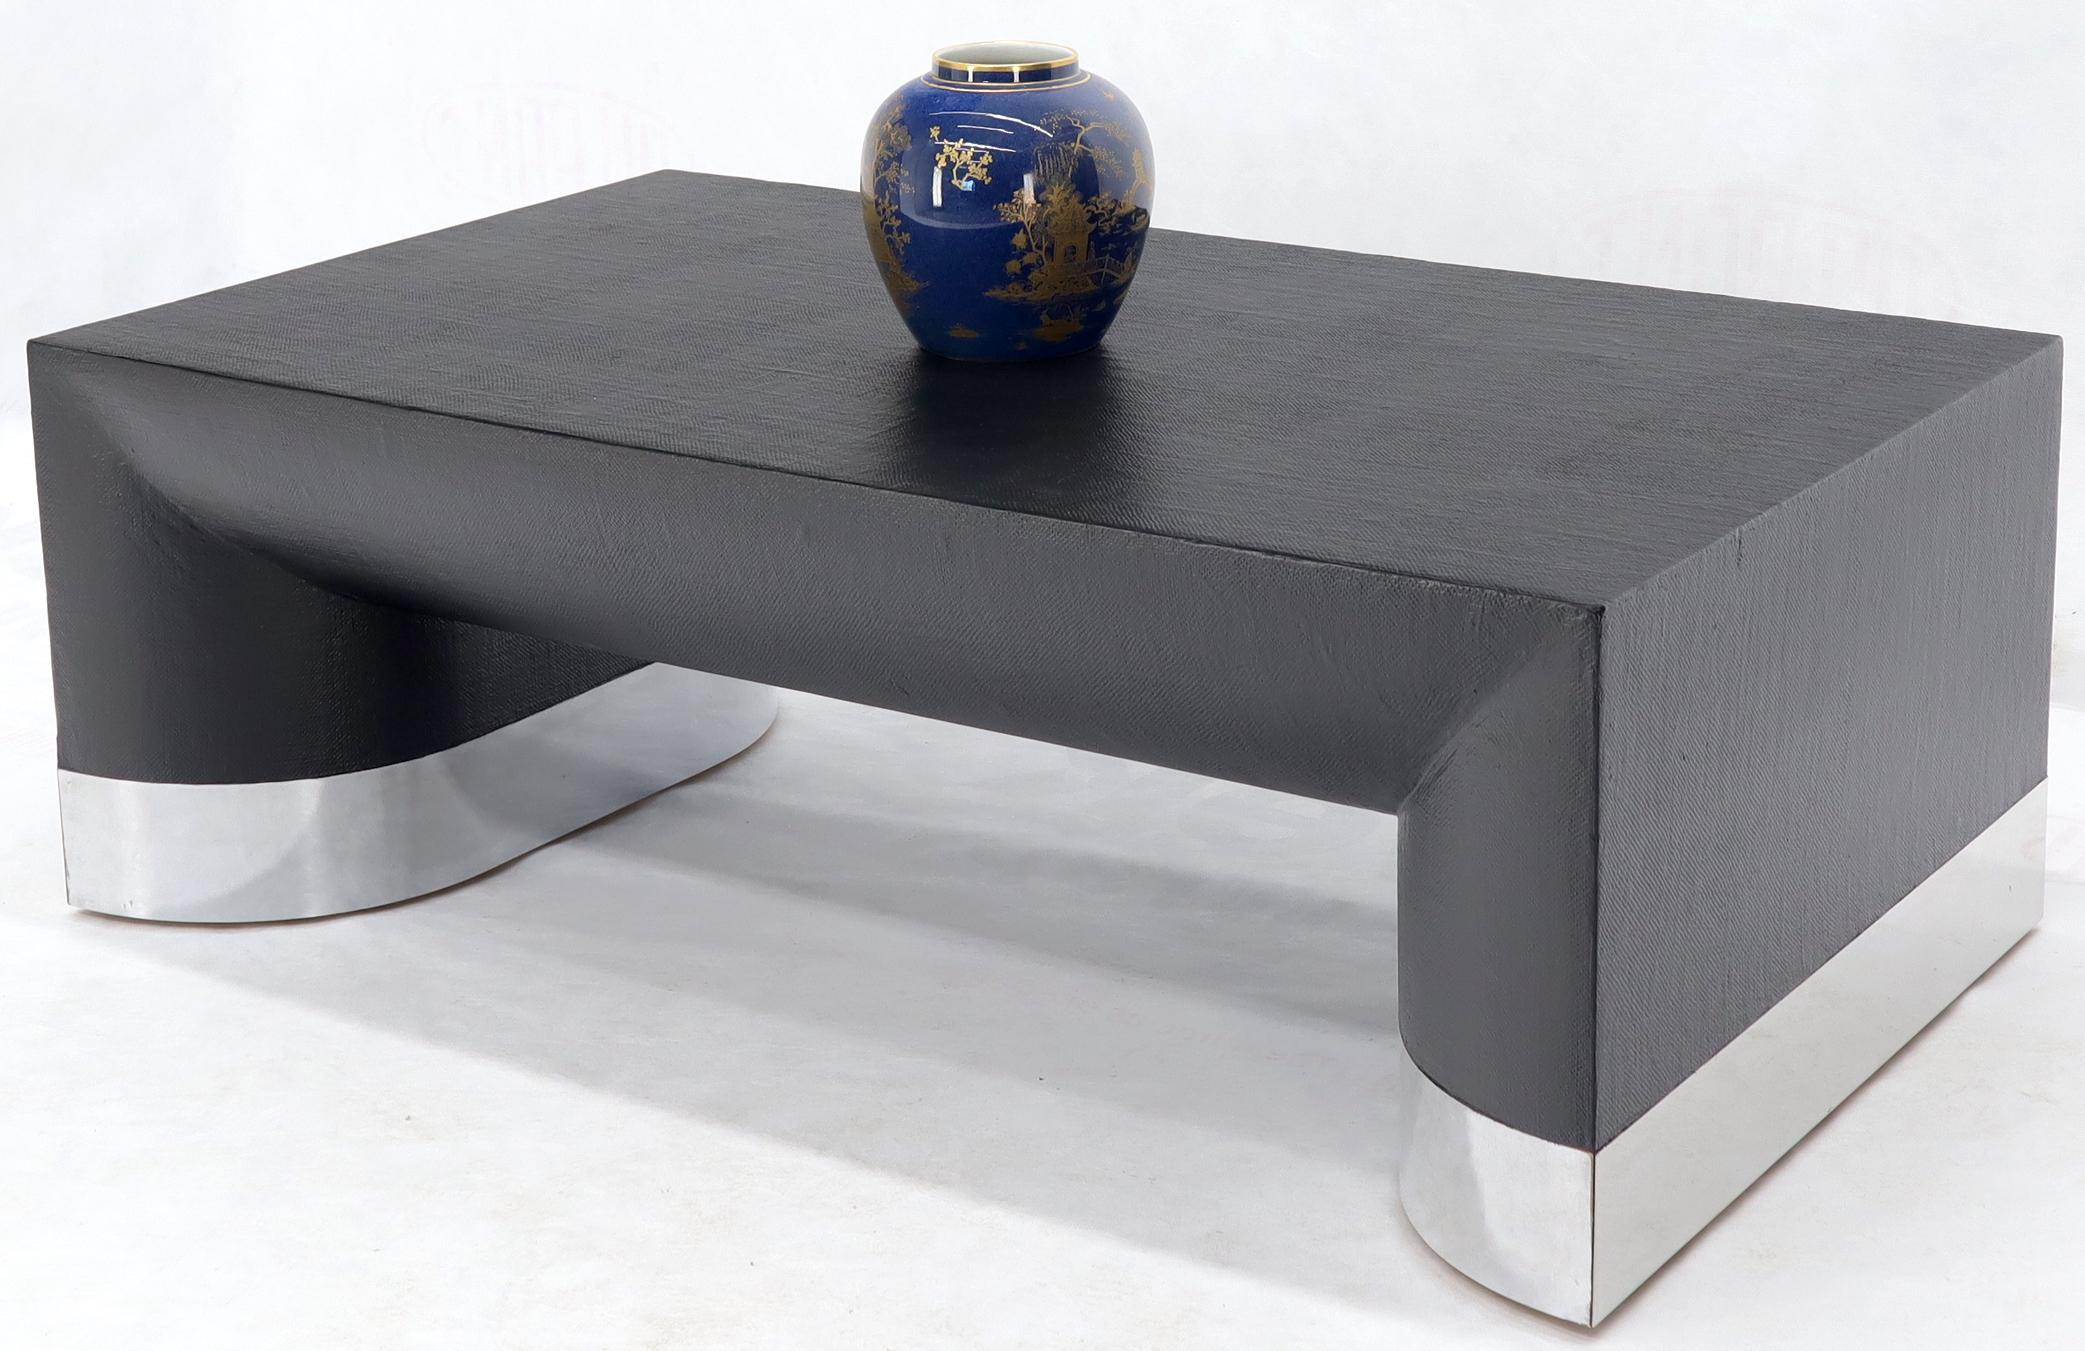 Large Black Lacquer Cloth Covered Chrome Base Rectangular Coffee Table In Excellent Condition For Sale In Rockaway, NJ